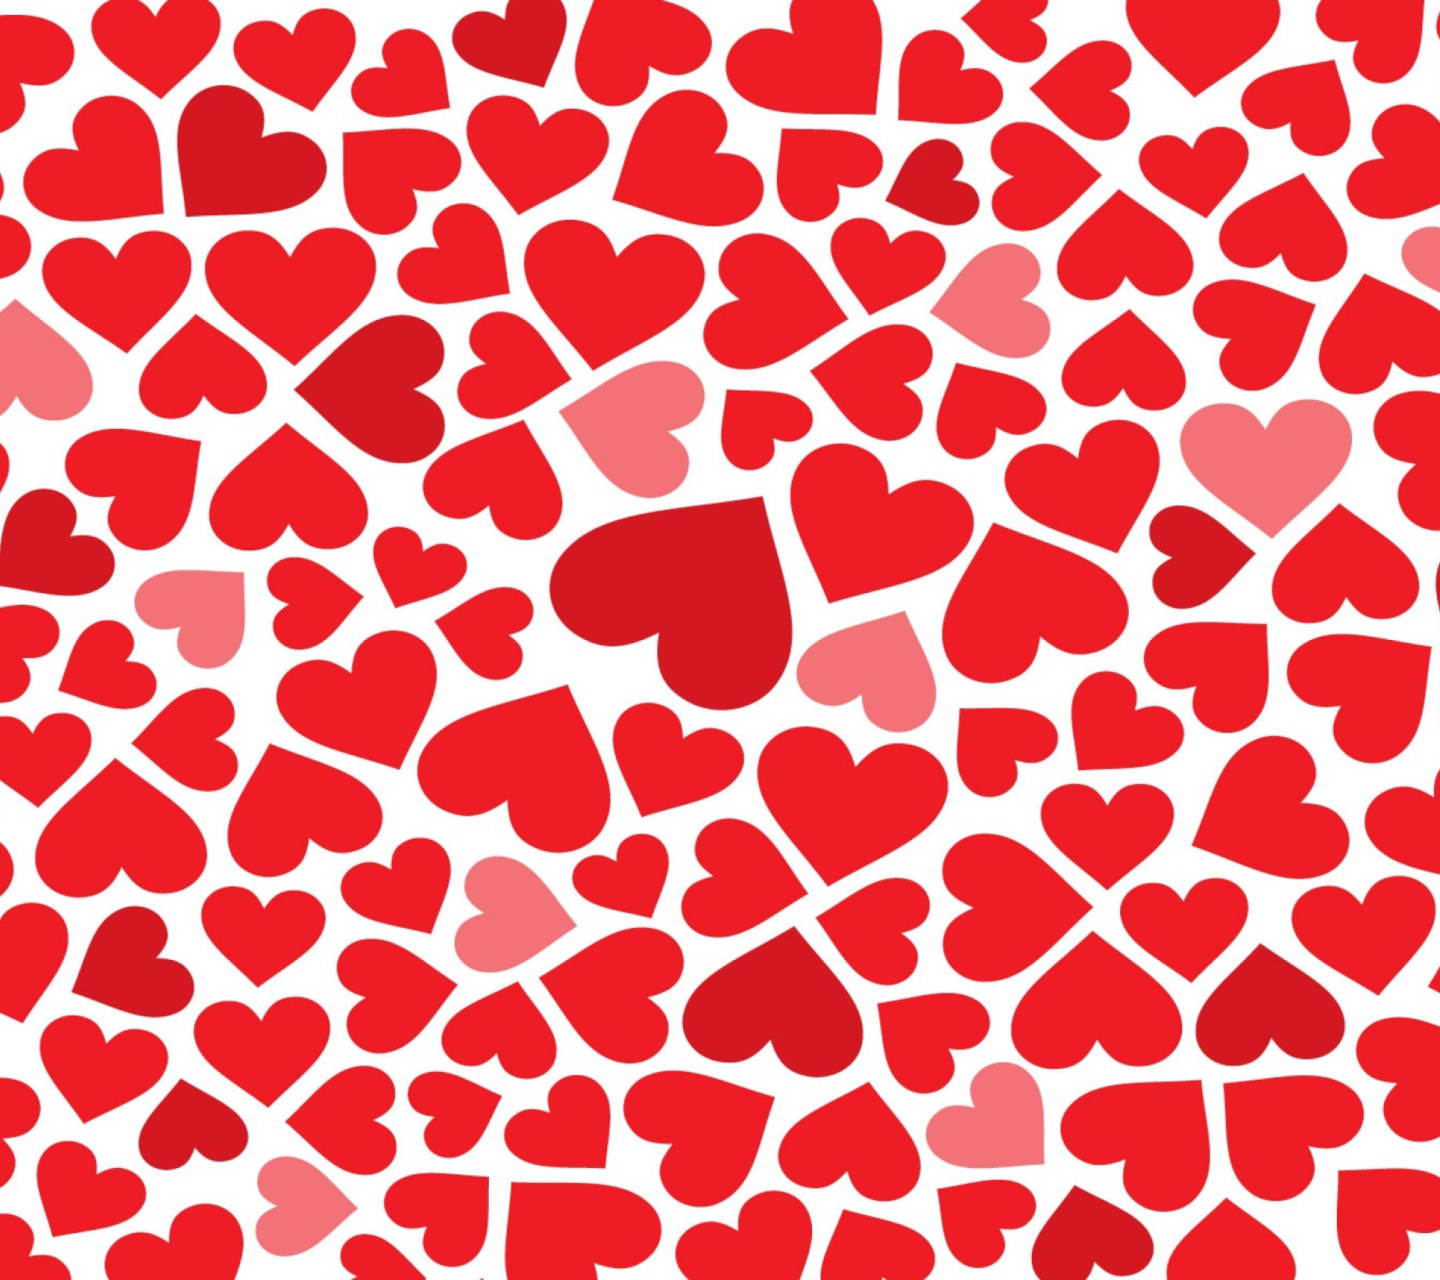 Red Hearts wallpaper 1440x1280